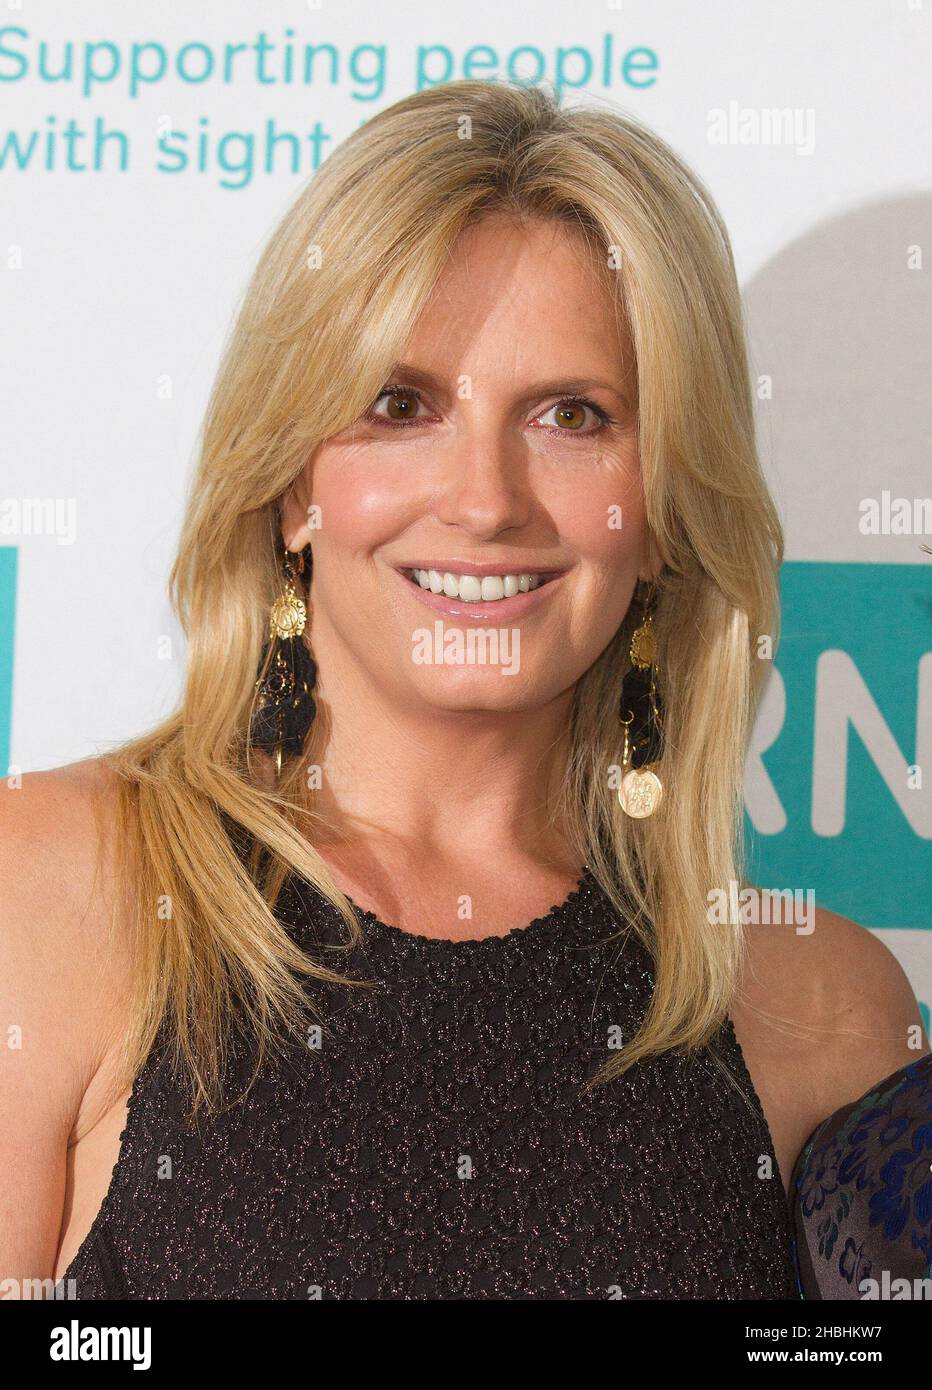 Penny Lancaster promotes her new fitness workout video, Ultimate Body  Workout, at Sainsbury's headquarters in London. Â©Doug  Peters/allactiondigital.com Stock Photo - Alamy